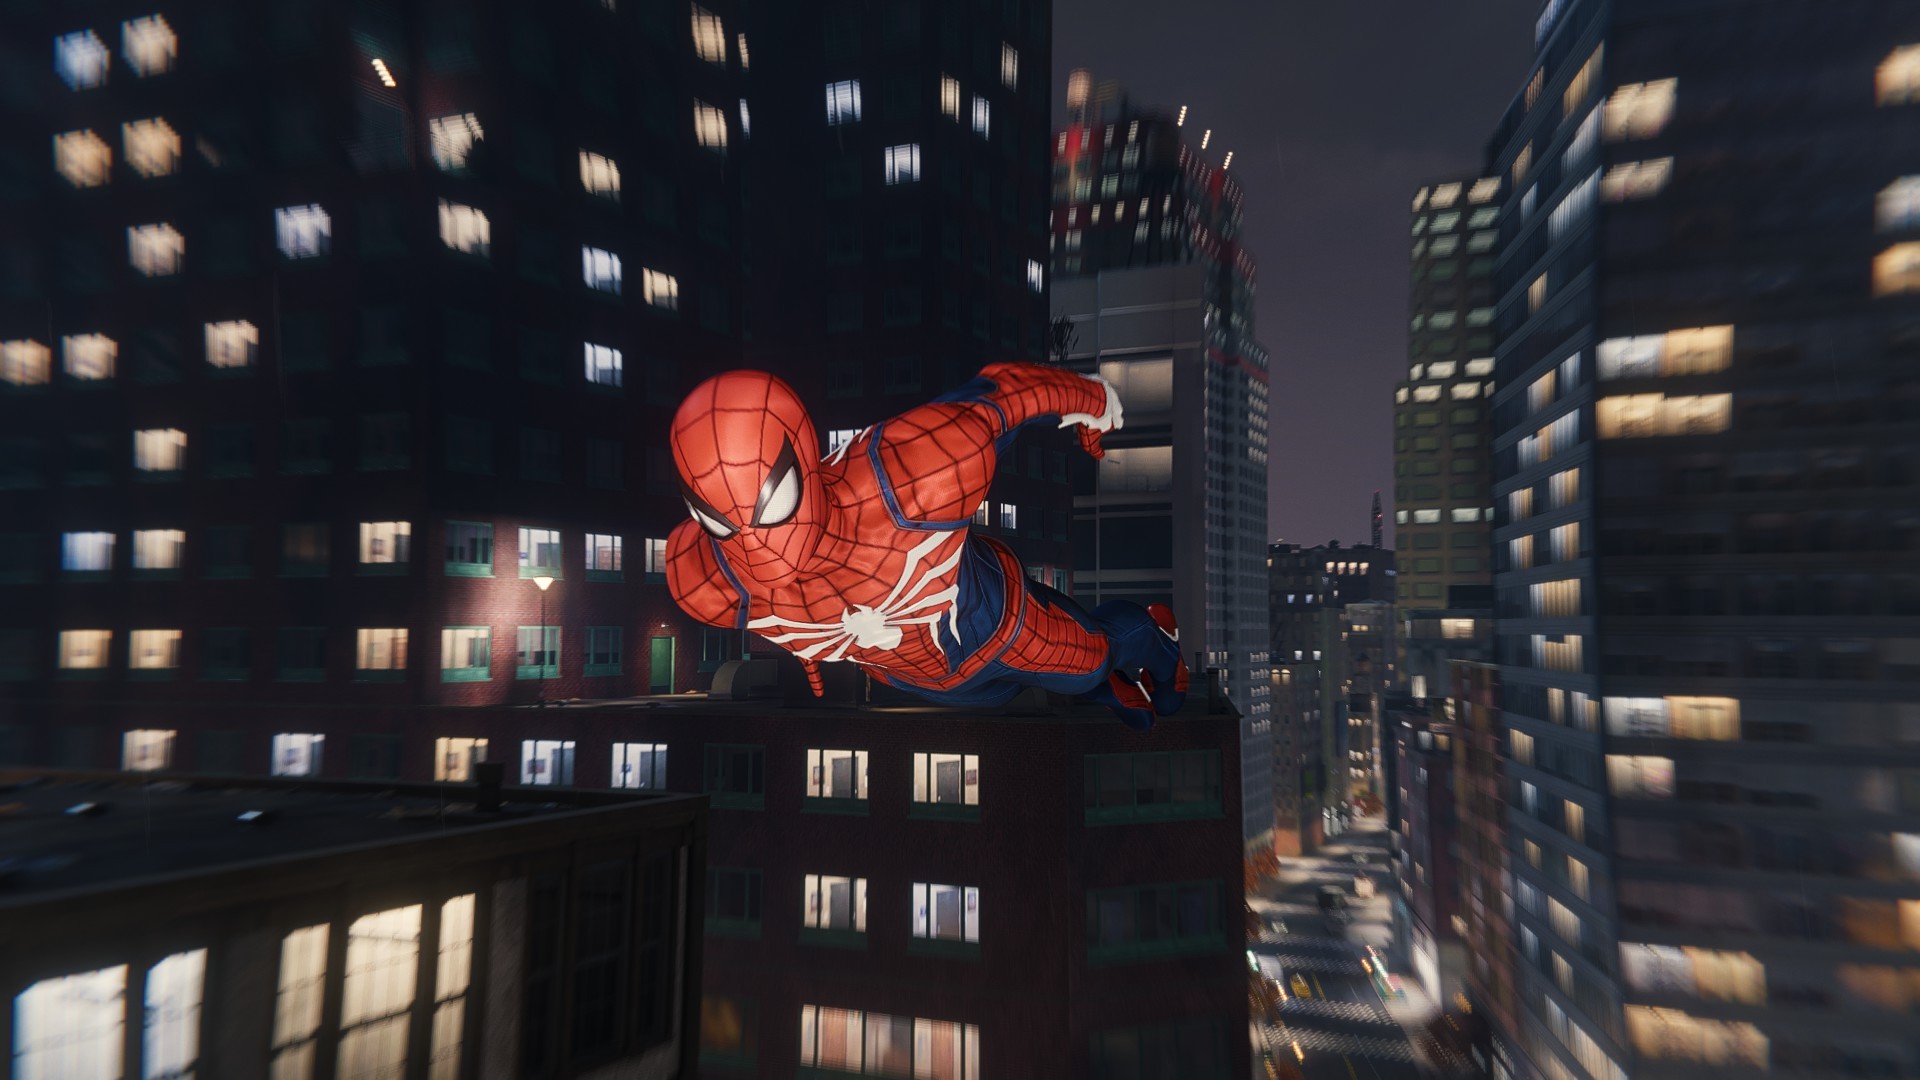 Playing on PC with keyboard and mouse : r/SpidermanPS4